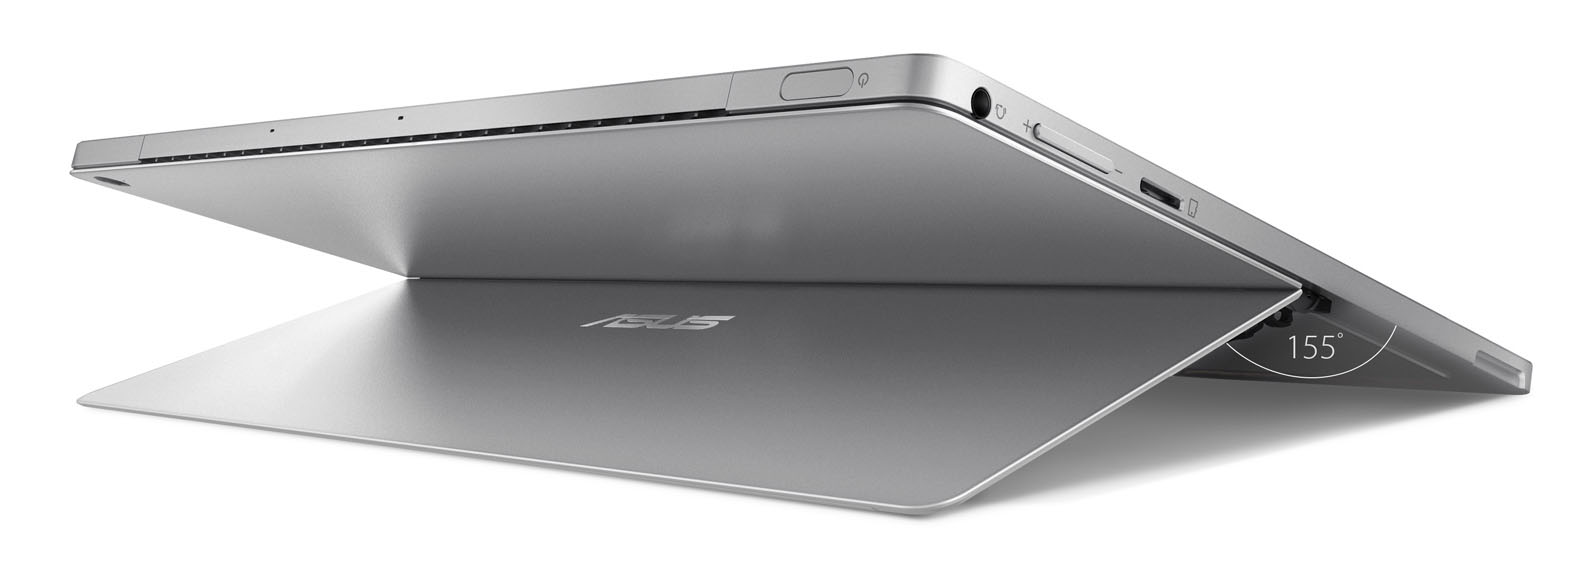 ASUS Transformer Pro (T304) - Specs, Tests, and Prices